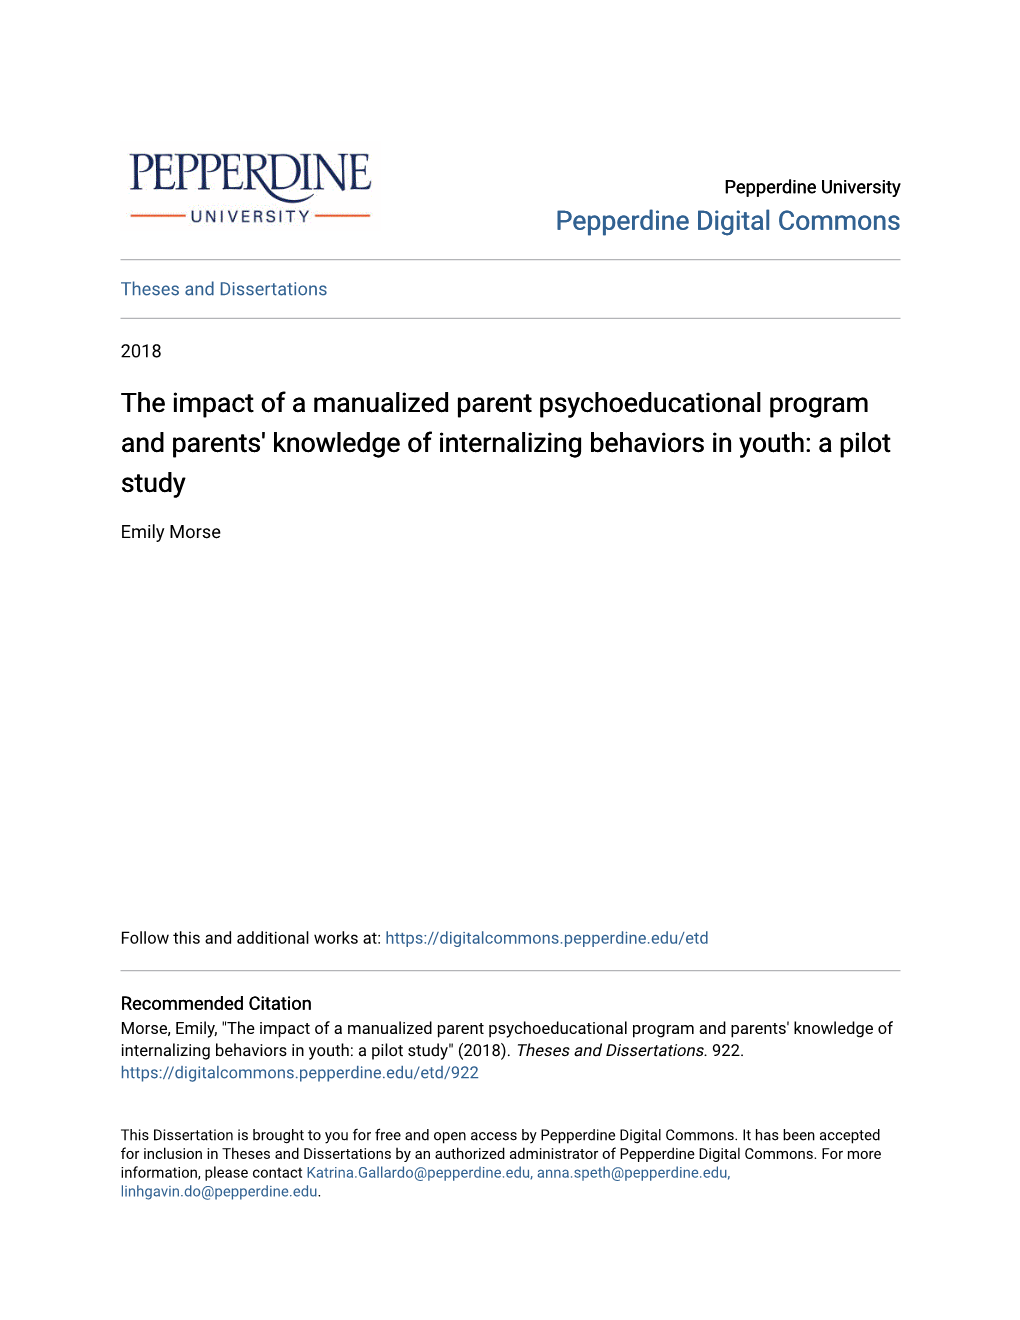 The Impact of a Manualized Parent Psychoeducational Program and Parents' Knowledge of Internalizing Behaviors in Youth: a Pilot Study